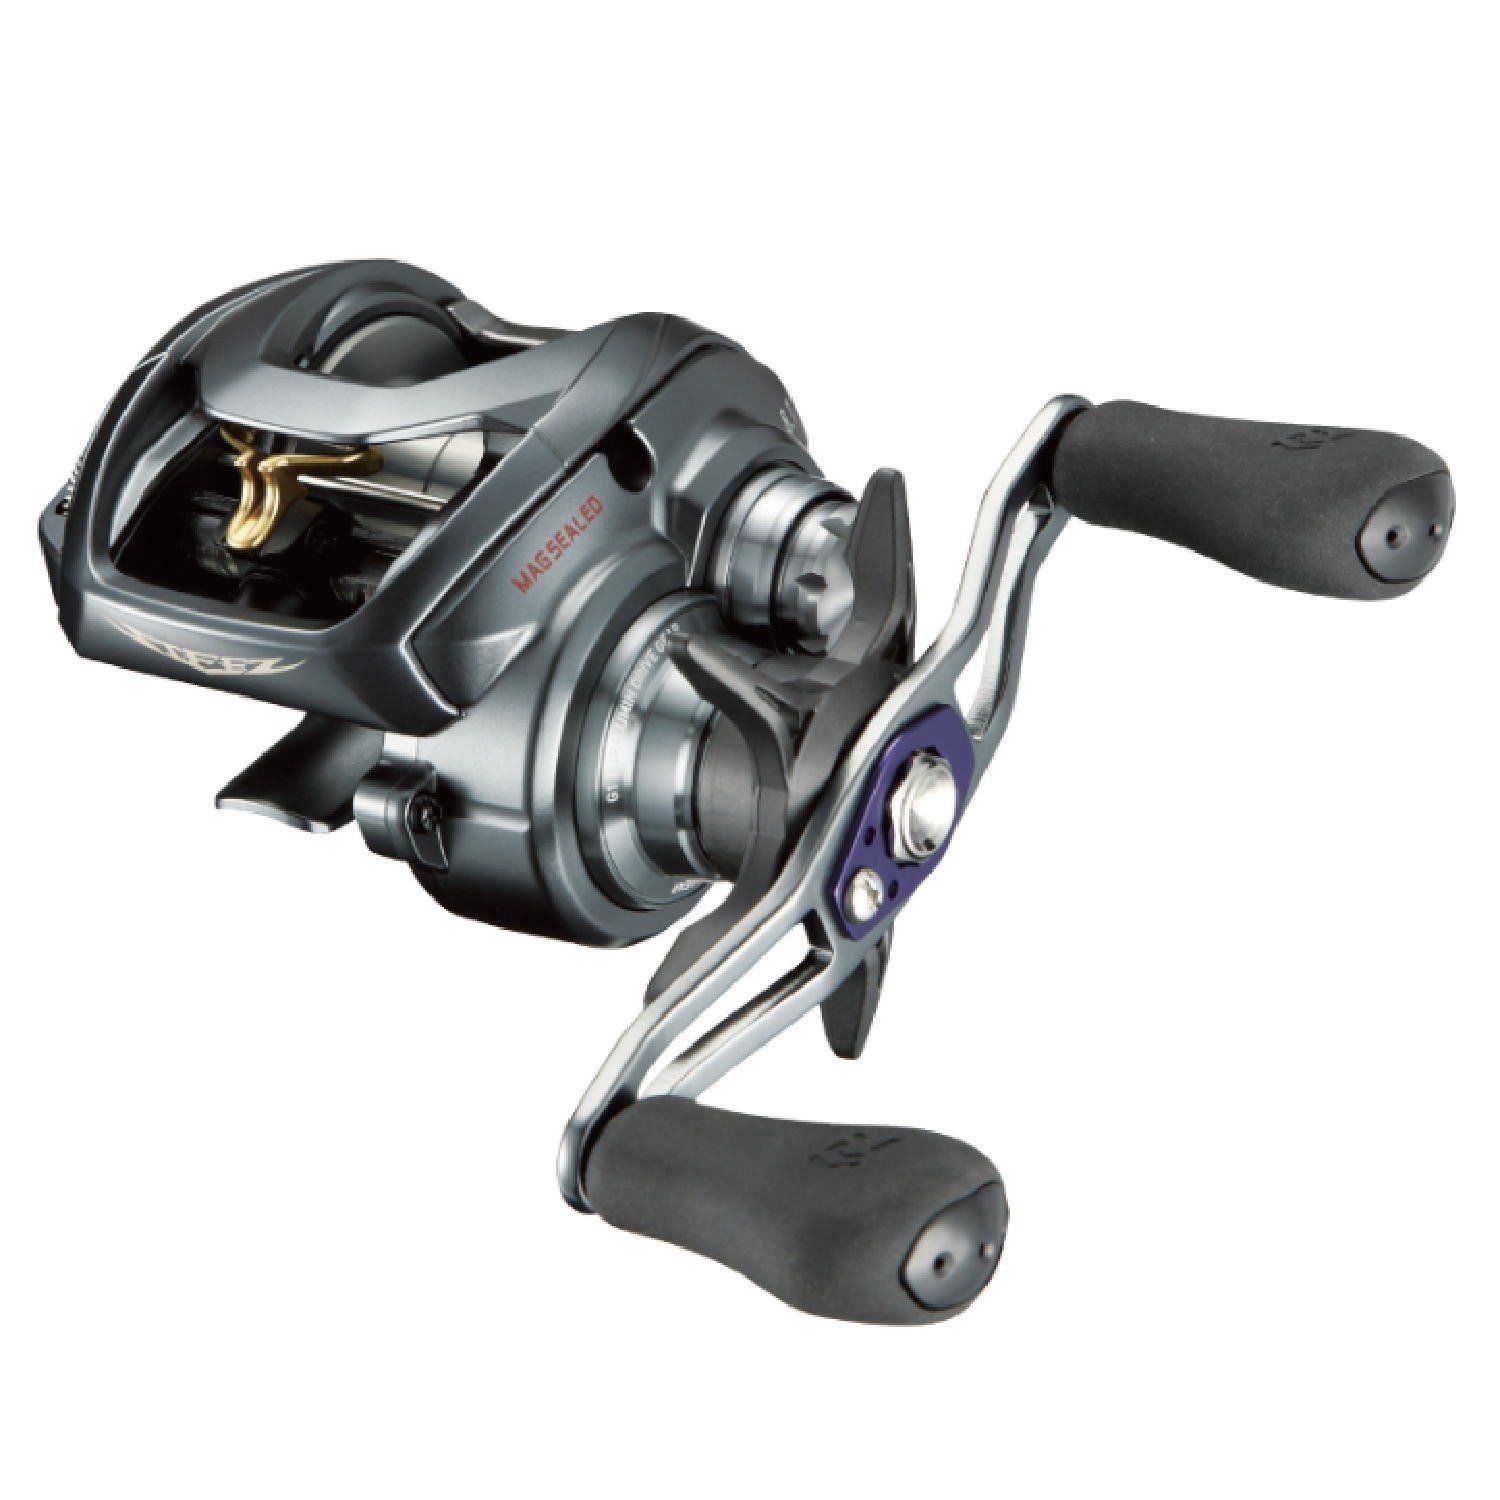 Daiwa Steez A Tw Xhl Right Handle Bait Casting Reel From Japan New